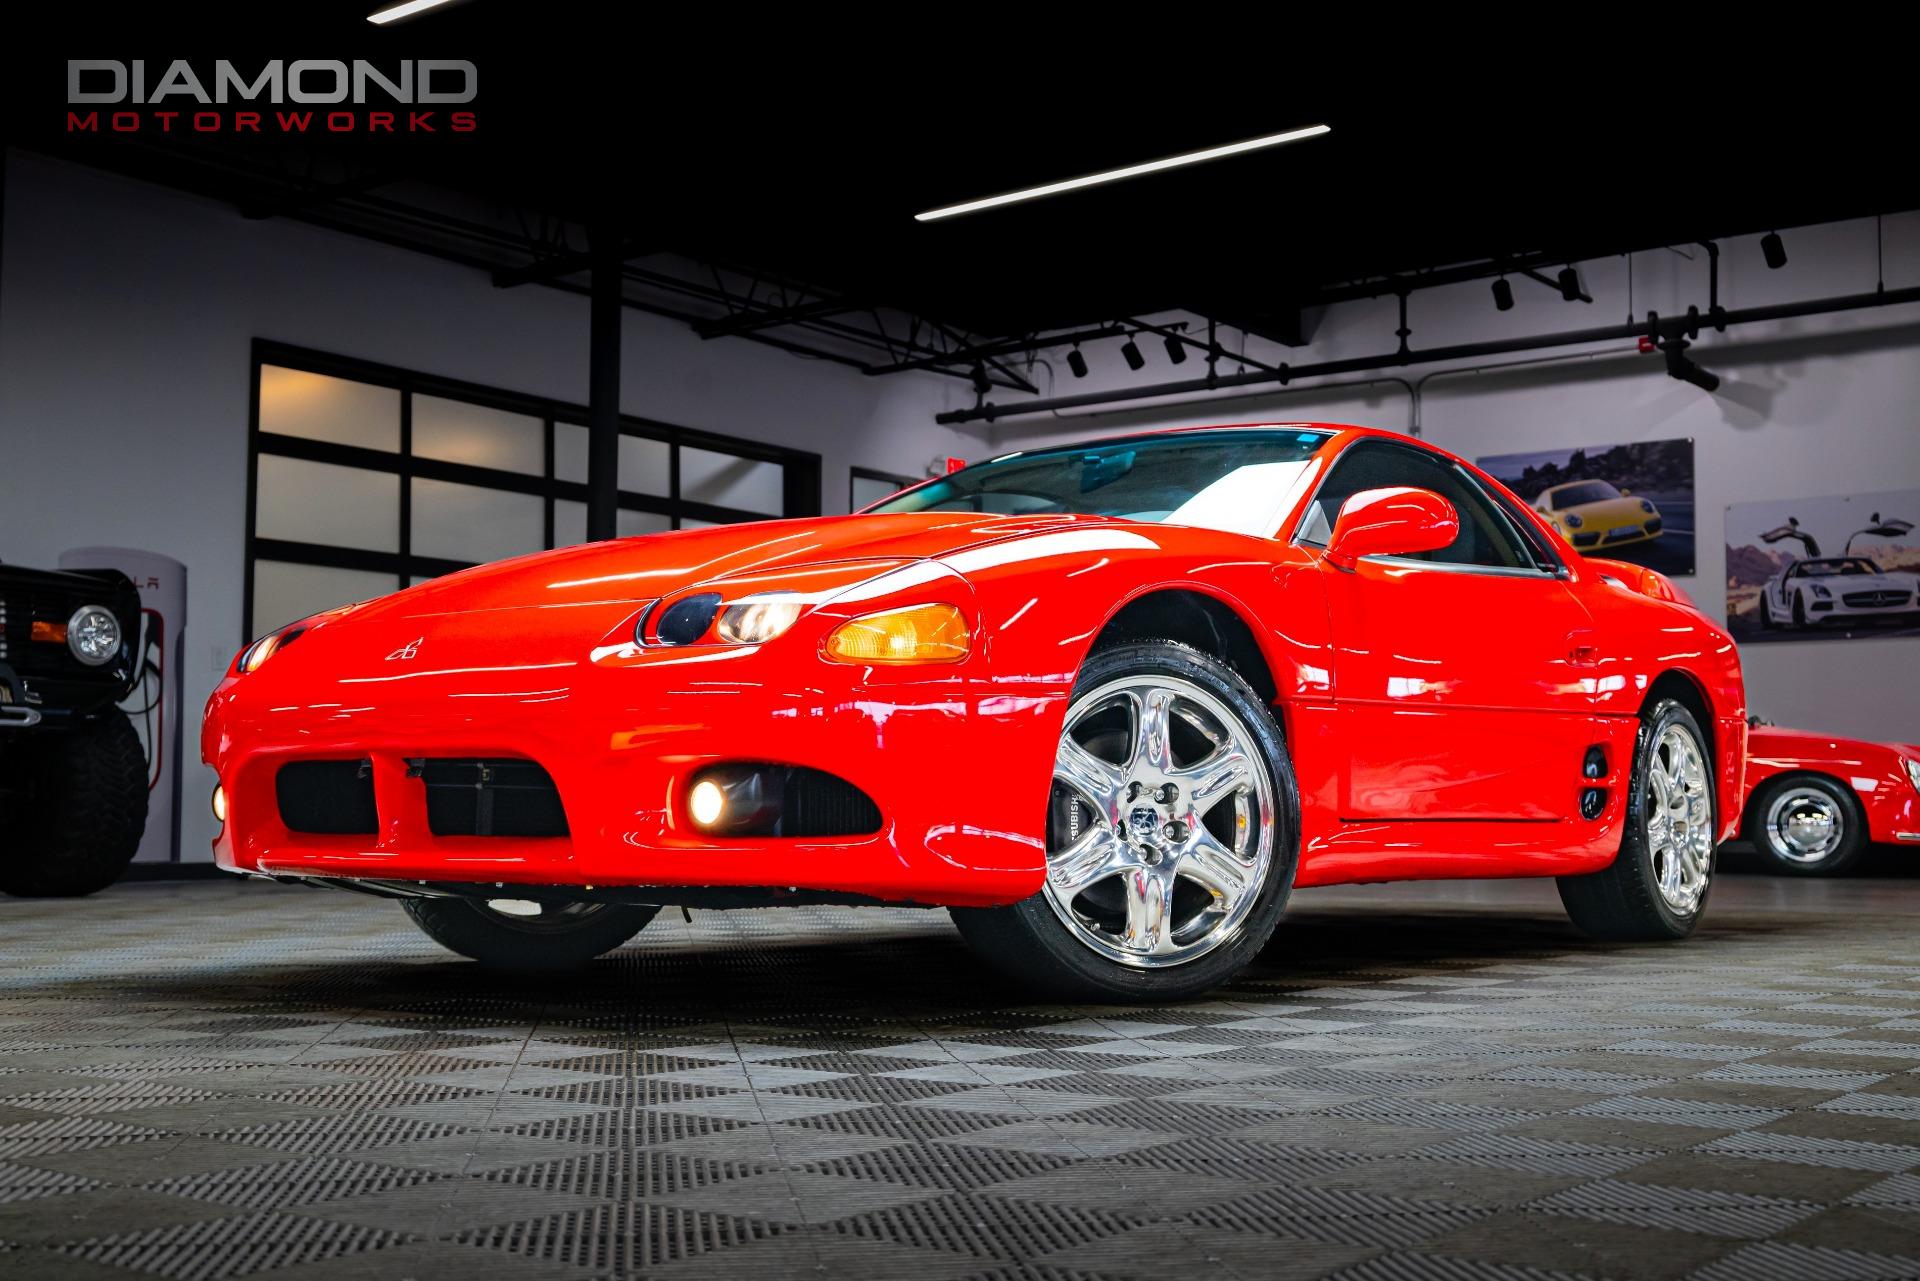 Used 1998 Mitsubishi 3000GT VR-4 Turbo For Sale ($54,800 